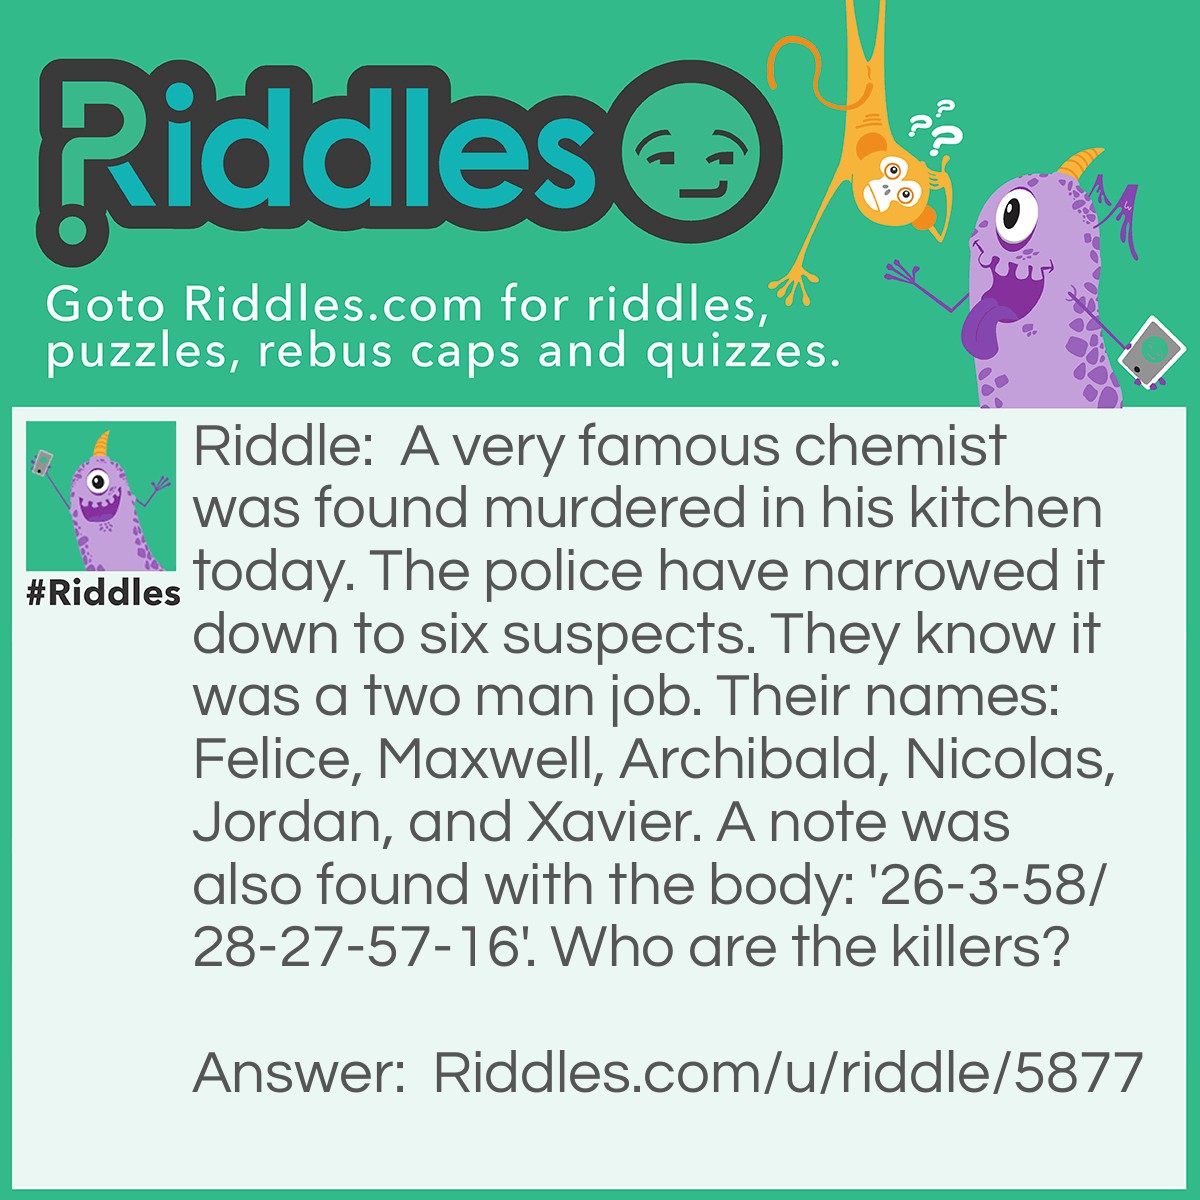 Riddle: A very famous chemist was found murdered in his kitchen today. The police have narrowed it down to six suspects. They know it was a two man job. Their names: Felice, Maxwell, Archibald, Nicolas, Jordan, and Xavier. A note was also found with the body: '26-3-58/28-27-57-16'. Who are the killers? Answer: Felice and Nicholas are the murderers. The numbers correspond to atomic numbers on the periodic table of elements: 'Fe-Li-Ce/Ni-Co-La-S'.